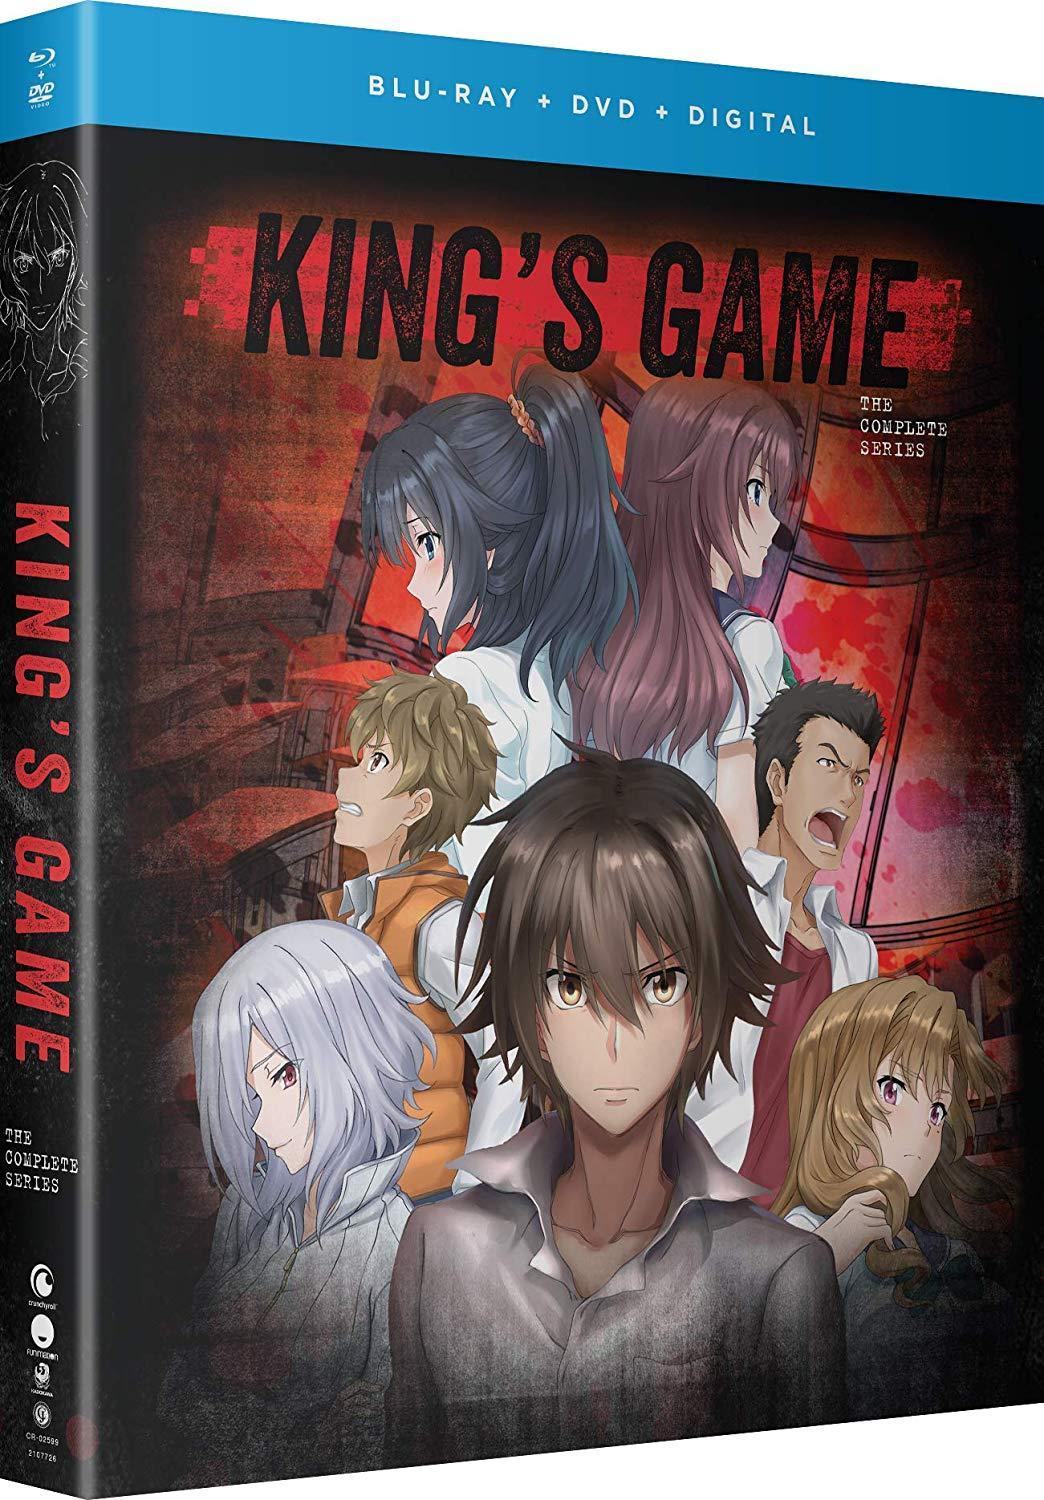 King's Game - The Complete Series - Blu-ray + DVD image count 1